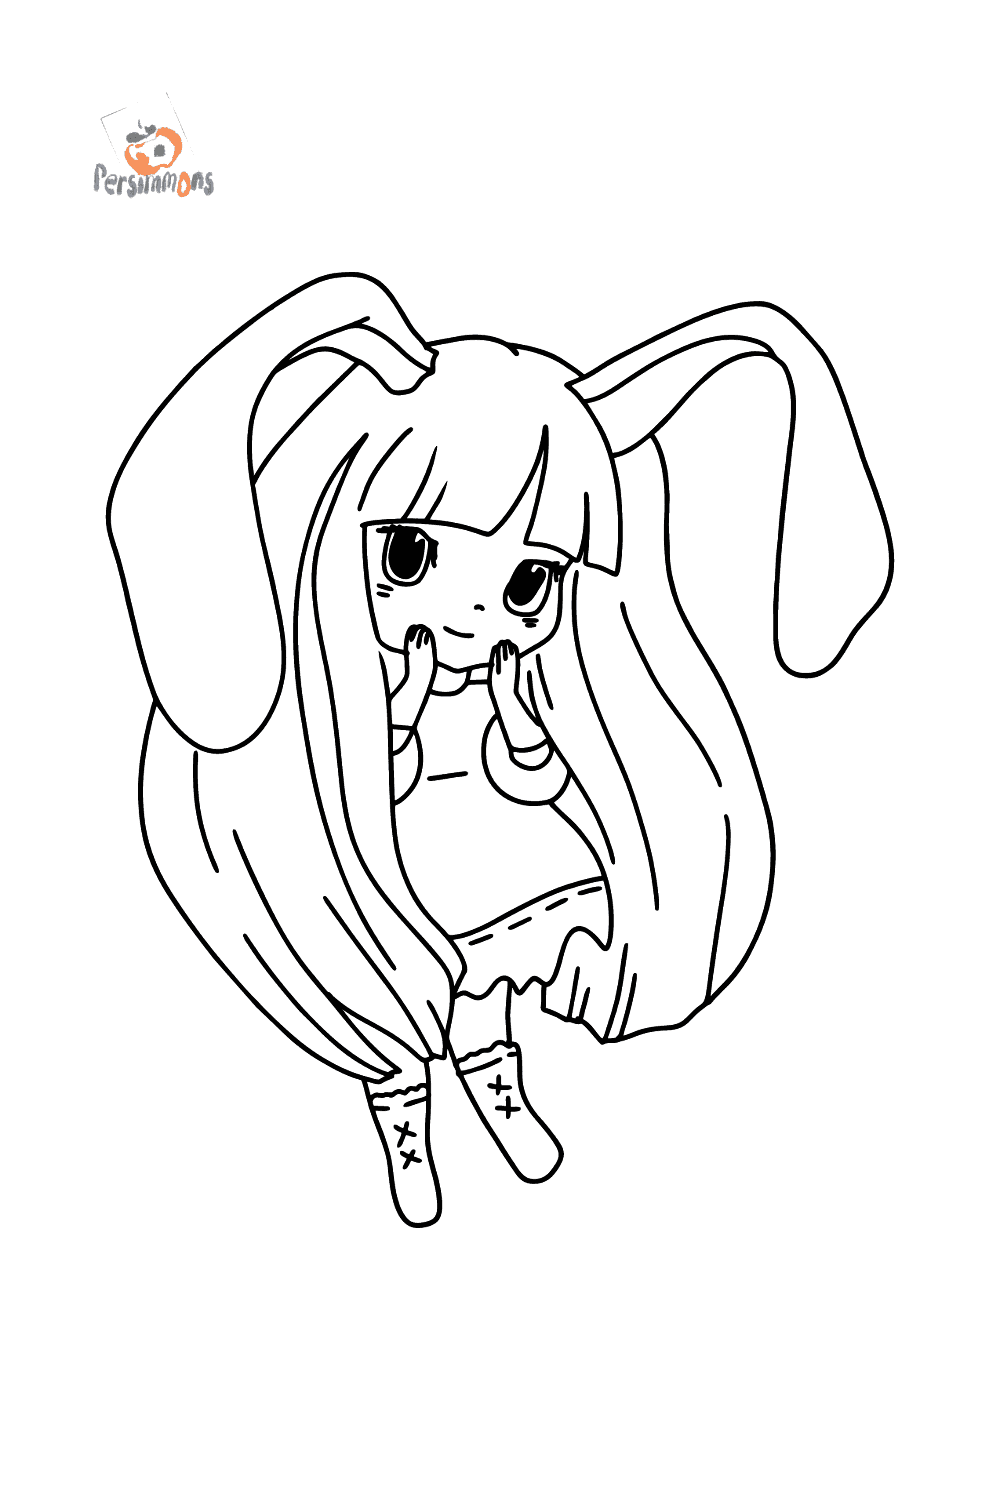 Anime Bunny Girl Coloring Pages ♥ Online and Print for Free